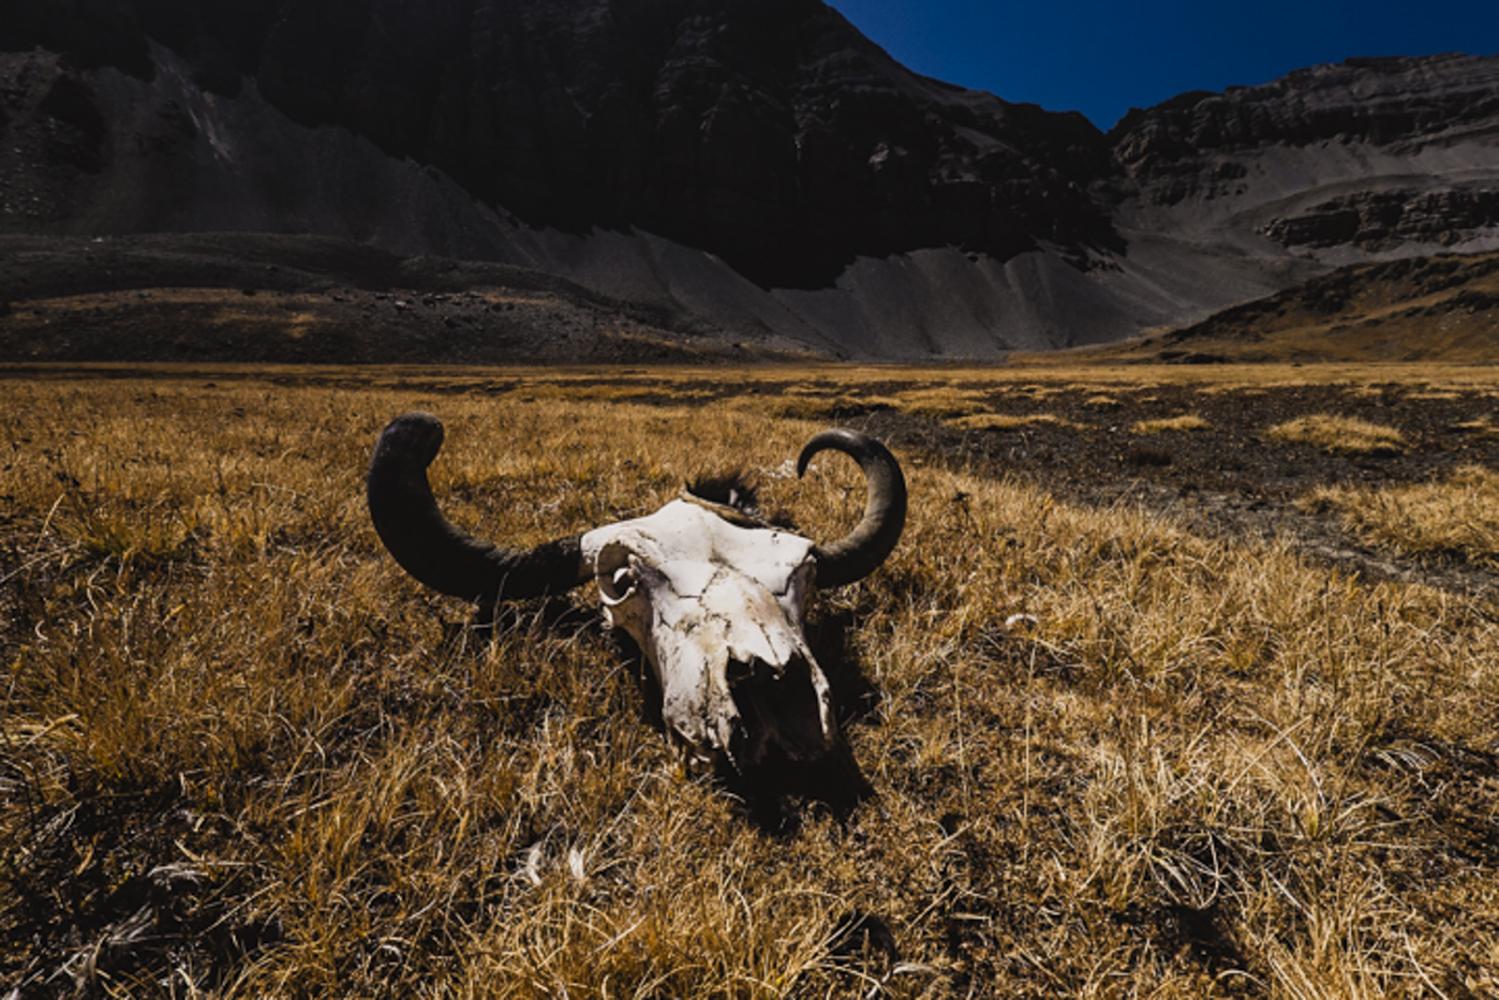 ENVIRONMENT - A yak skull remains in the parched mountains near the...